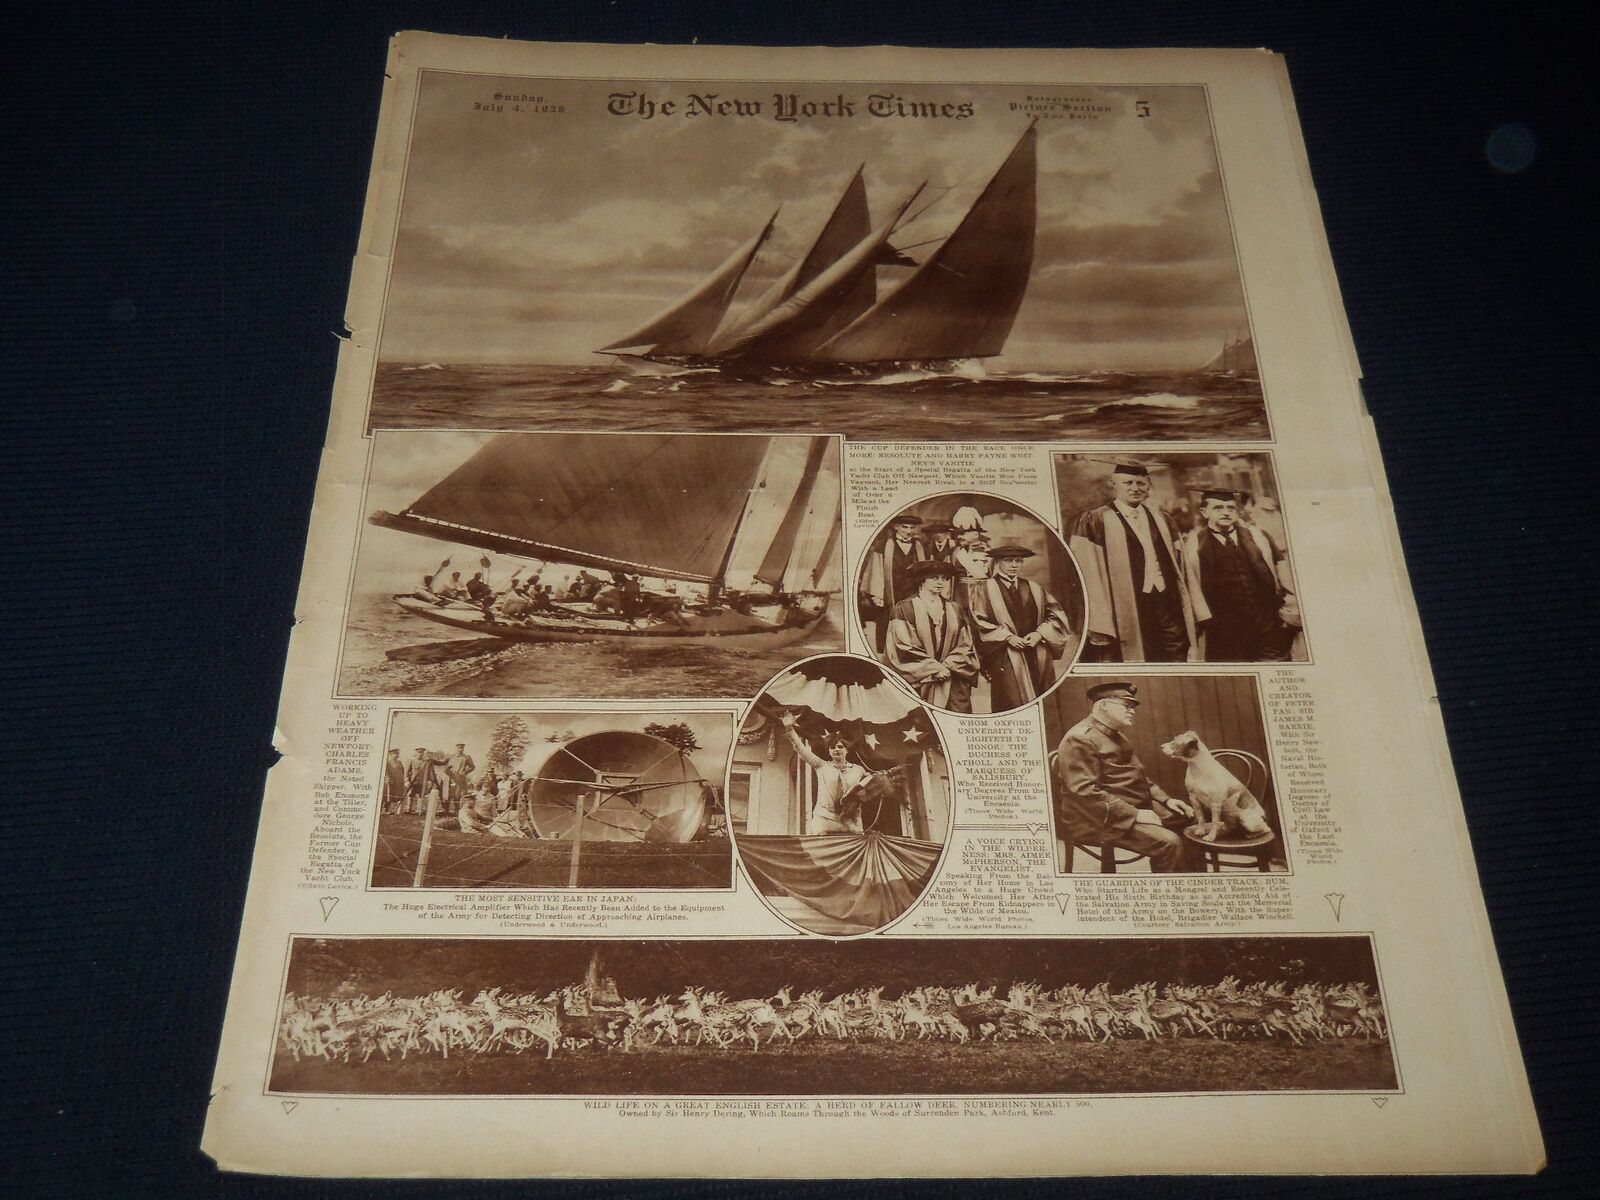 1926 JULY 4 NEW YORK TIMES PICTURE SECTION - J. M. BARRIE - NT 9504